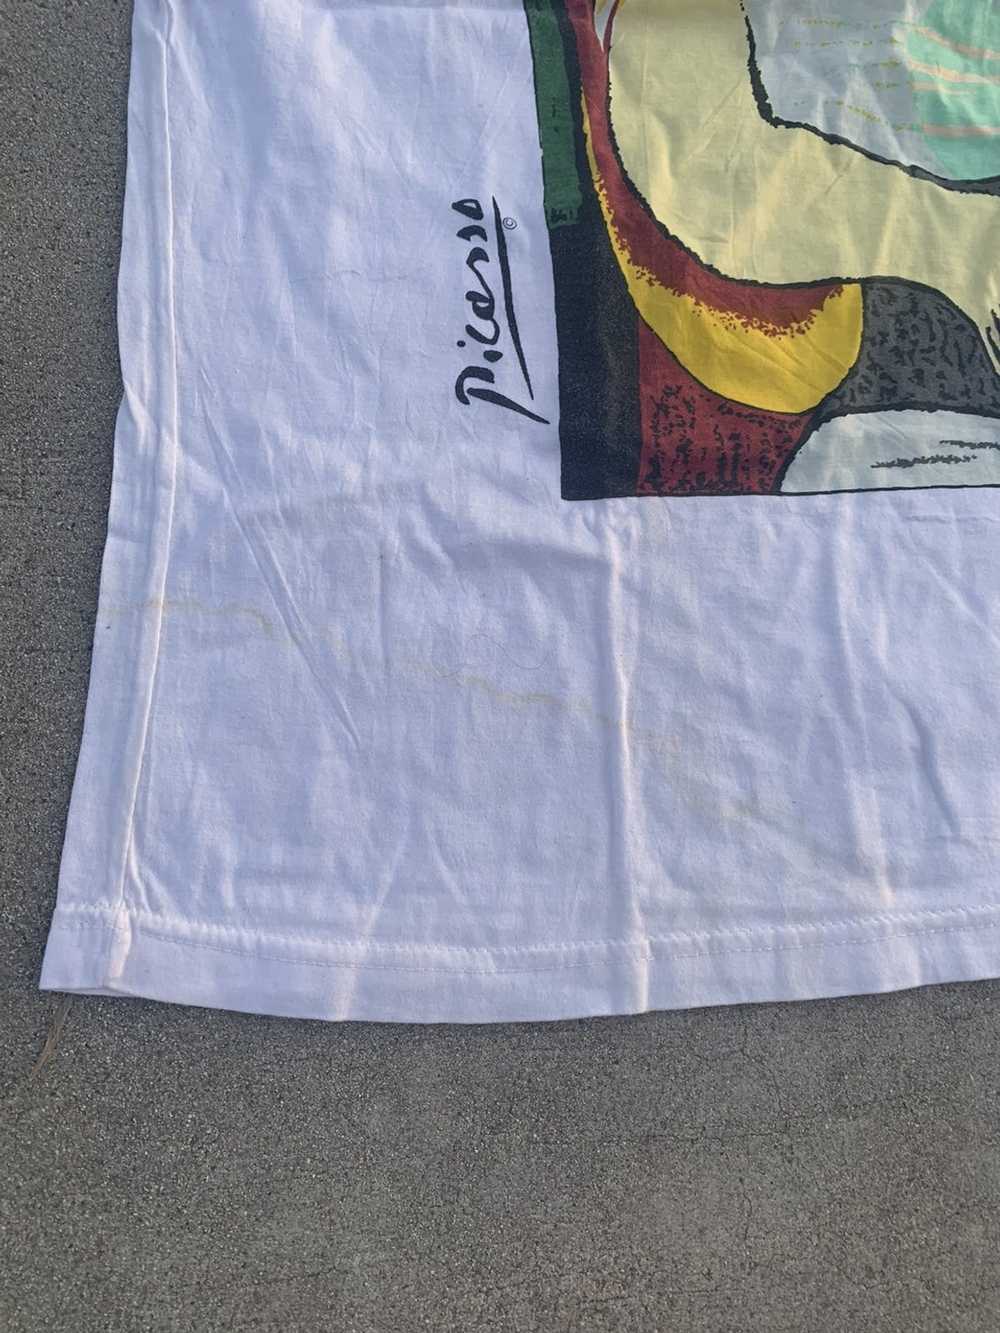 Vintage Extremely Rare Pablo Picasso Shirt - image 2